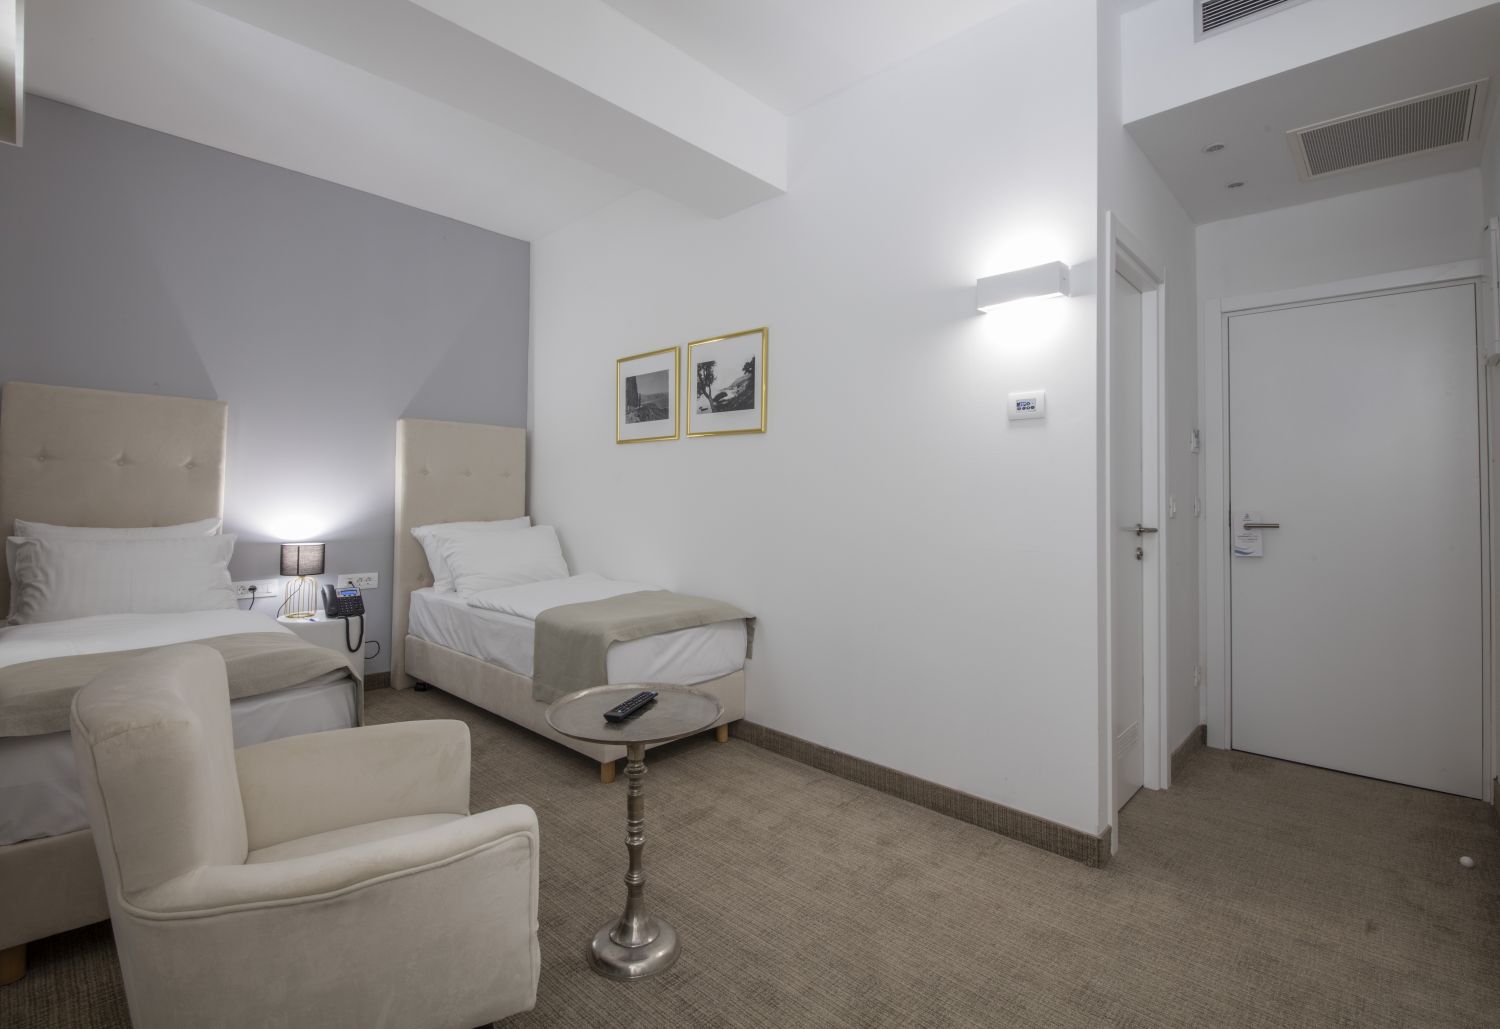 22 aminess bellevue hotel rooms standard double room s2 standard double room s2 3